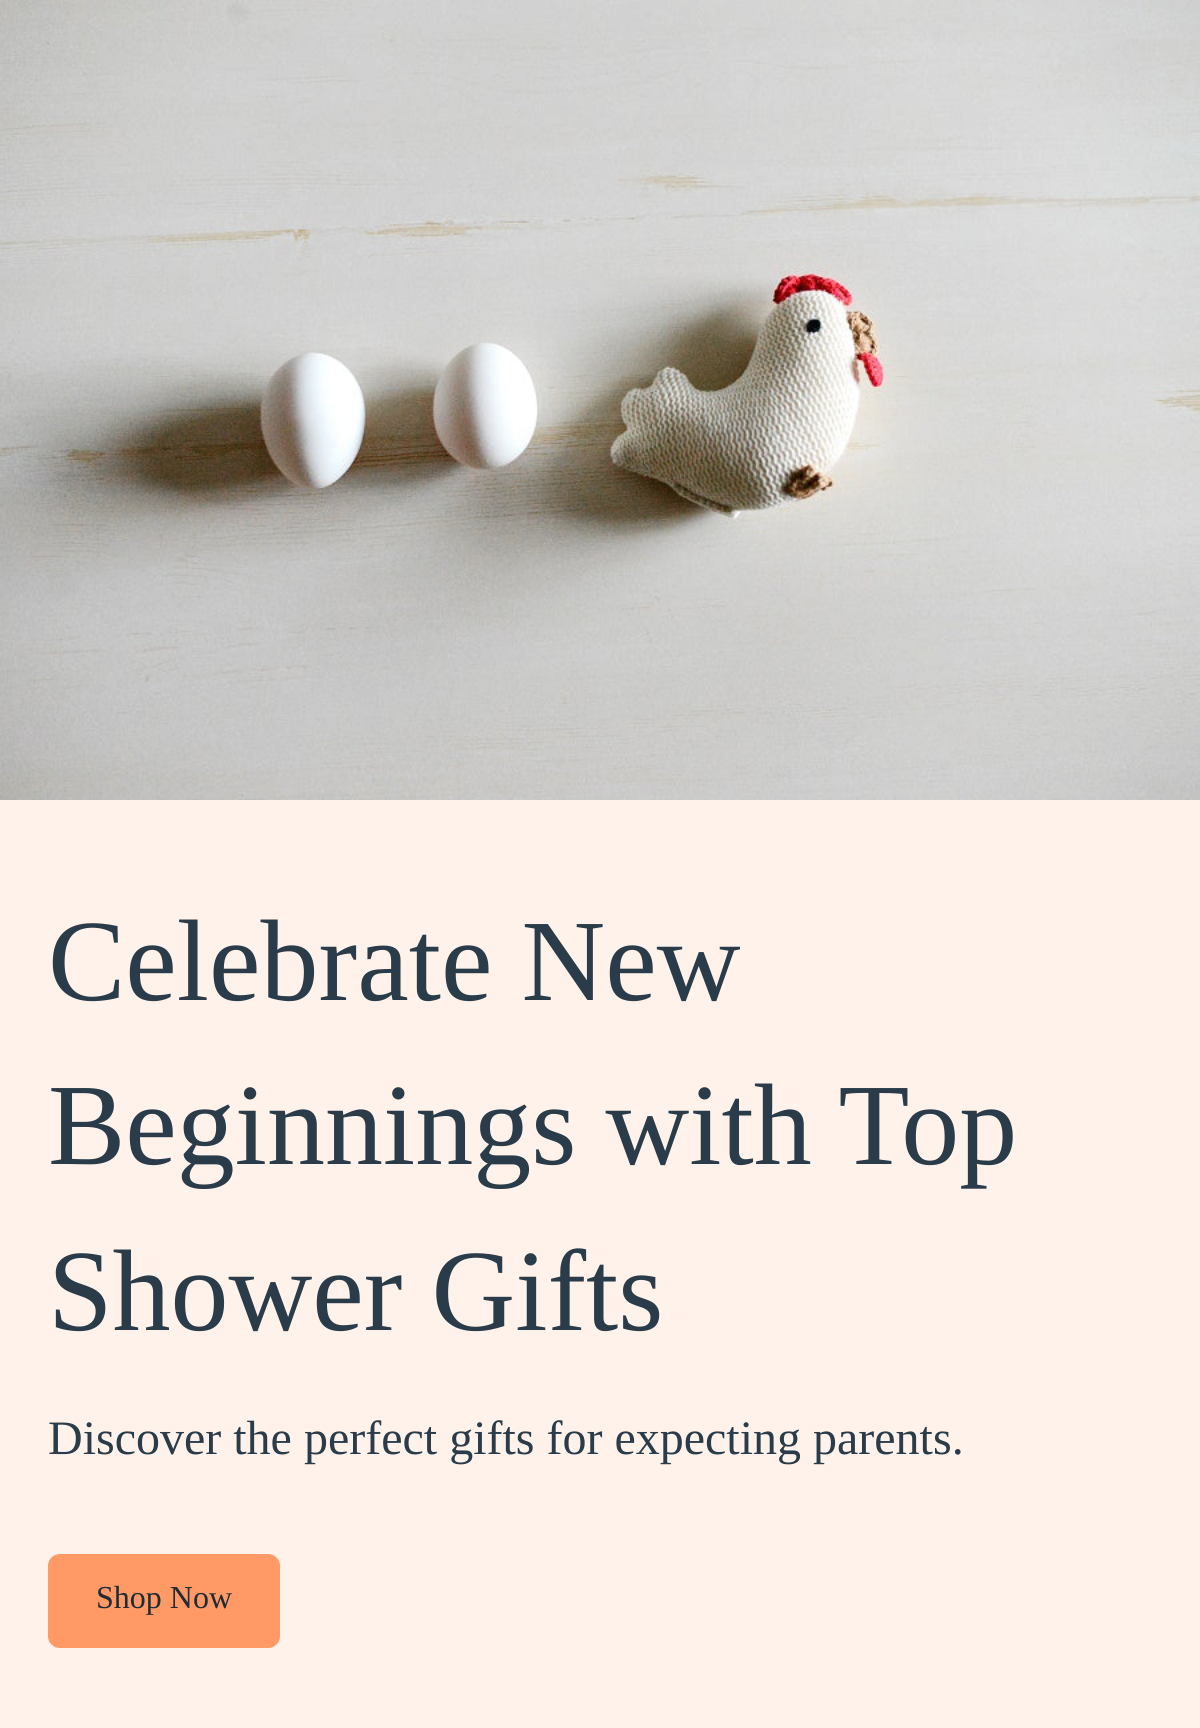  Celebrate New Beginnings with Top Shower Gifts Discover the perfect gifts for expecting parents. Shop Now